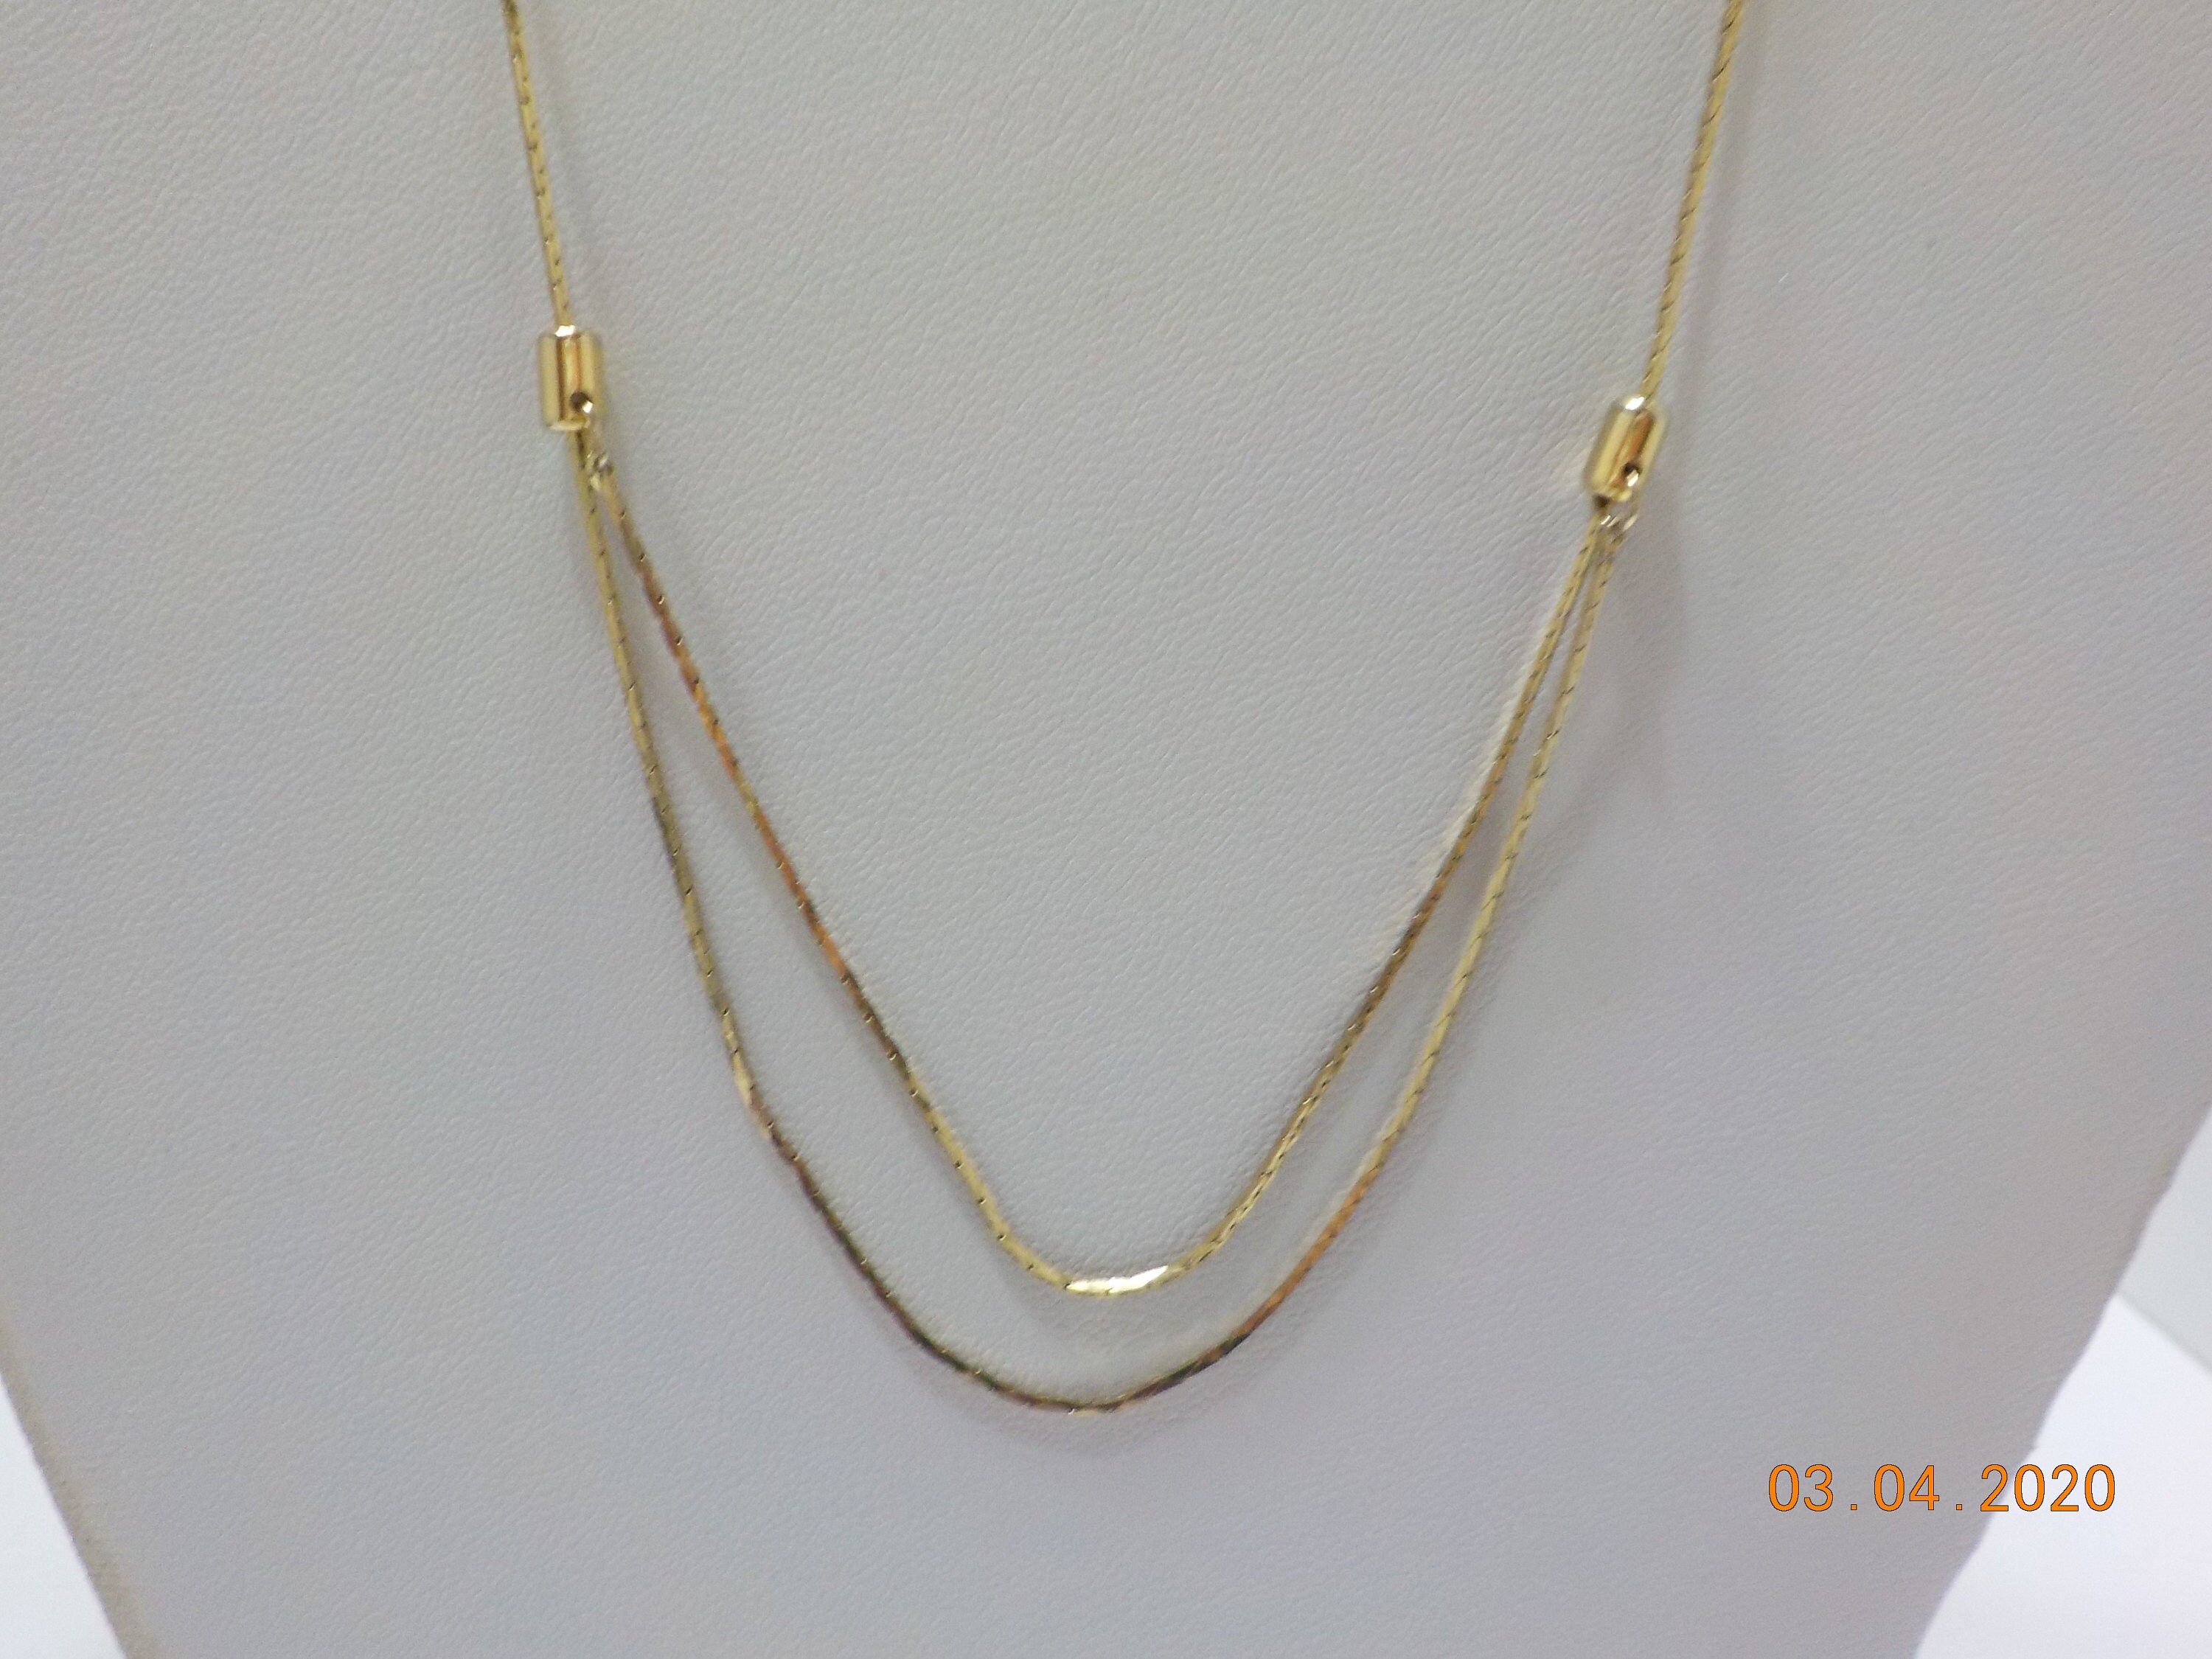 Details about   Vintage Gold Tone SLIDER Adjustable Chain Necklace Retro Jewelry Unbranded 